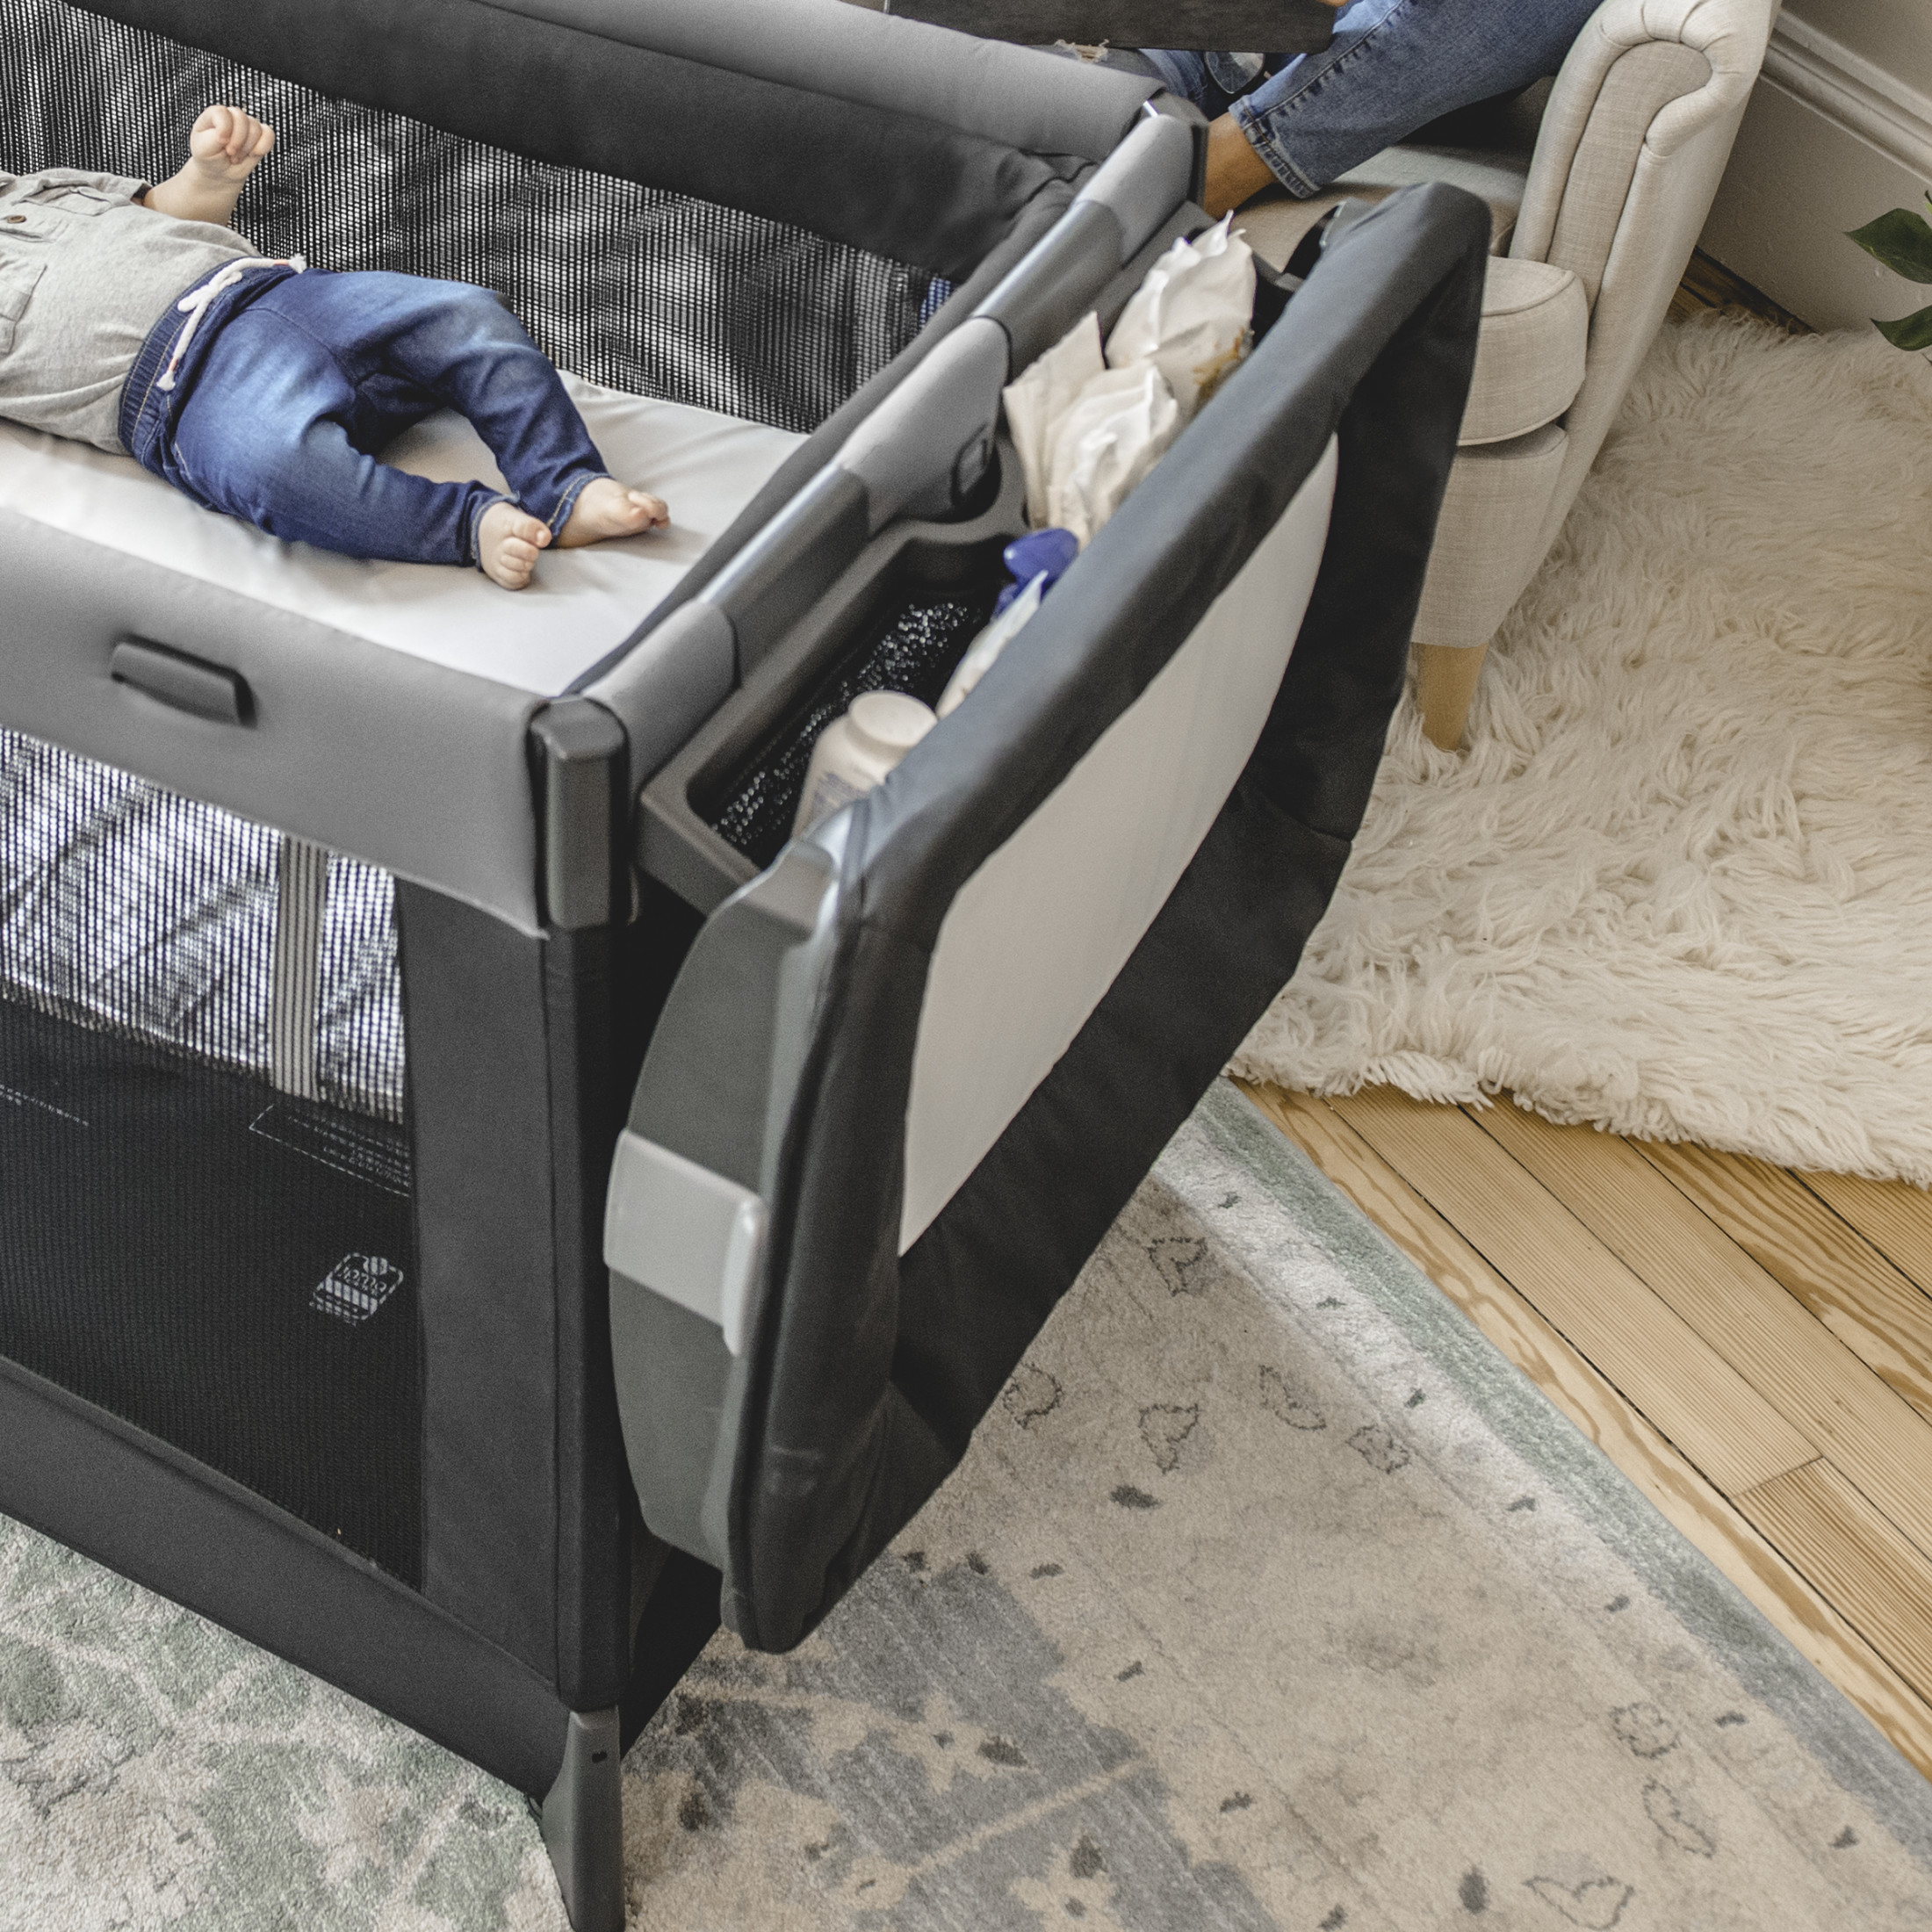 Chicco Lullaby All-in-One Portable Playard with Bassinet and Snap-on Changer - Camden (Black) - image 5 of 10